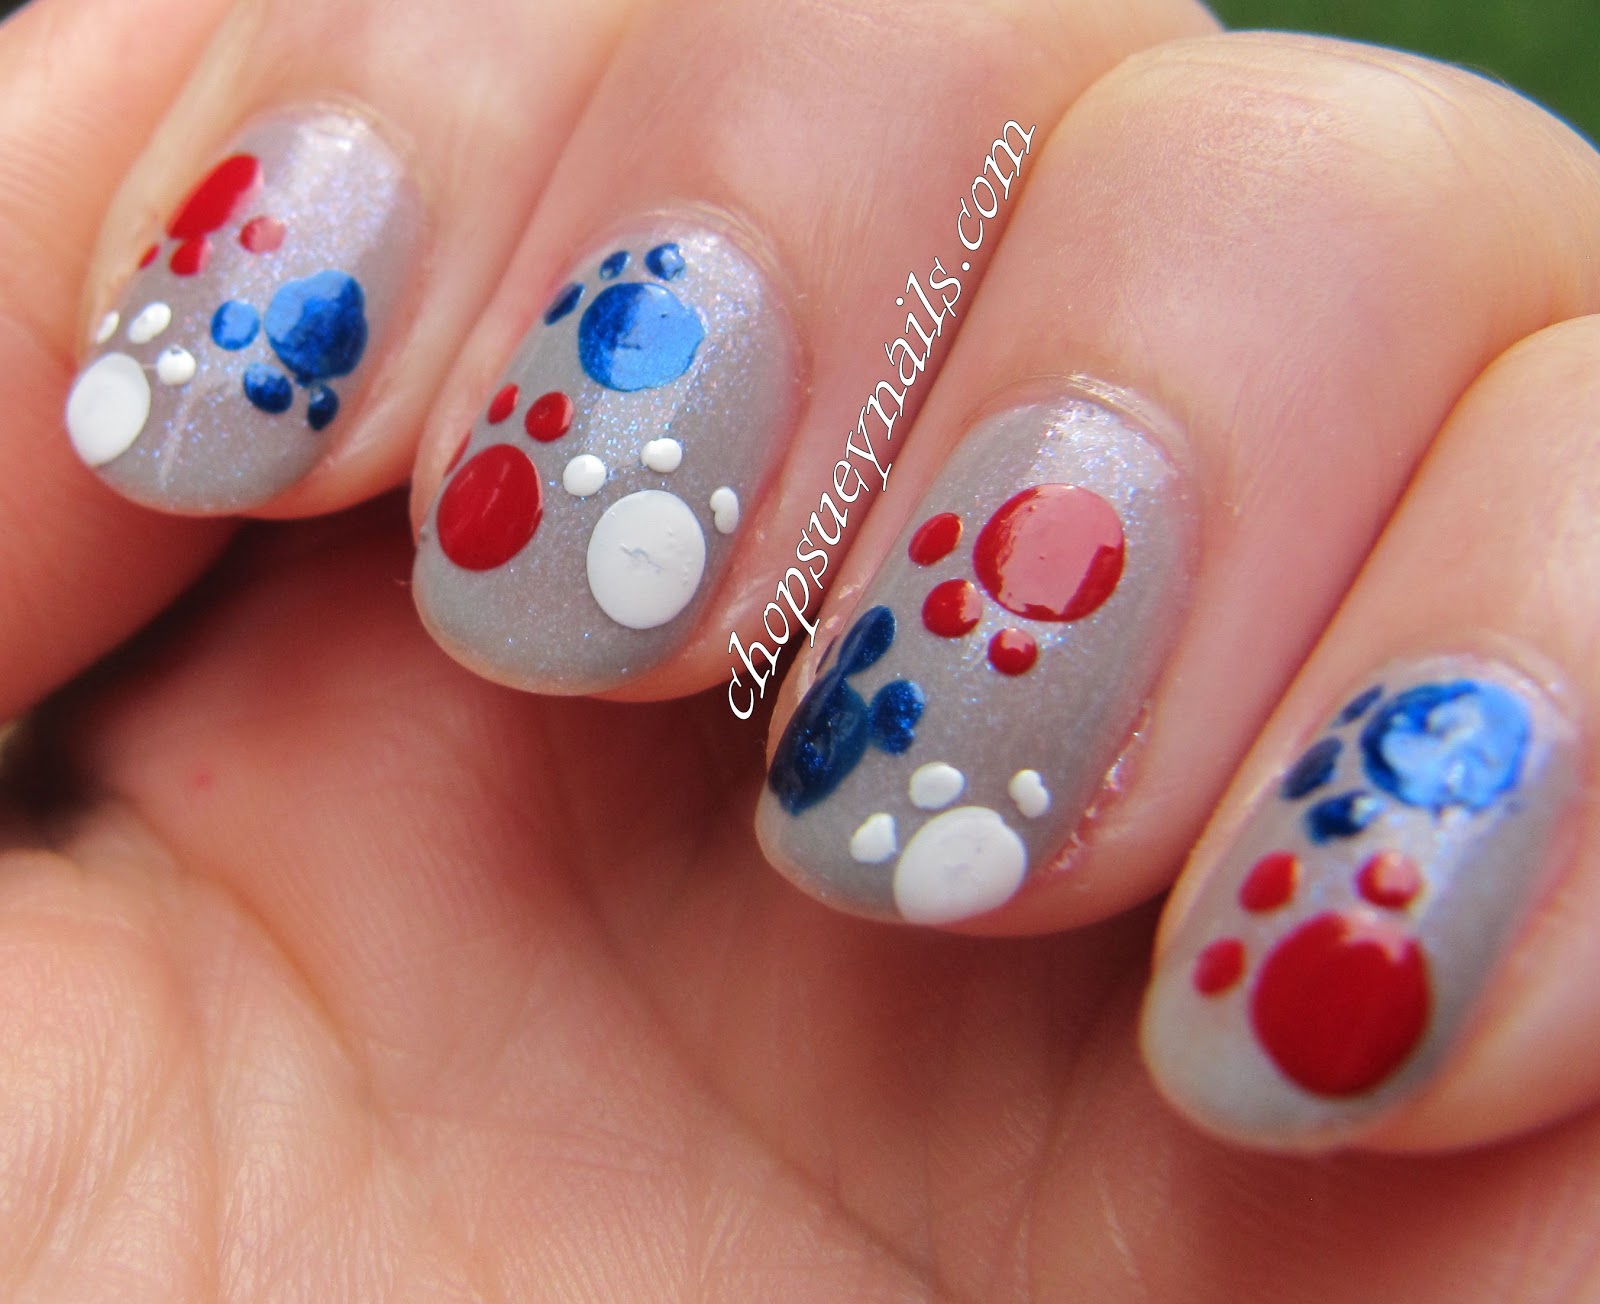 1. Cute Paw Print Acrylic Nails - wide 7